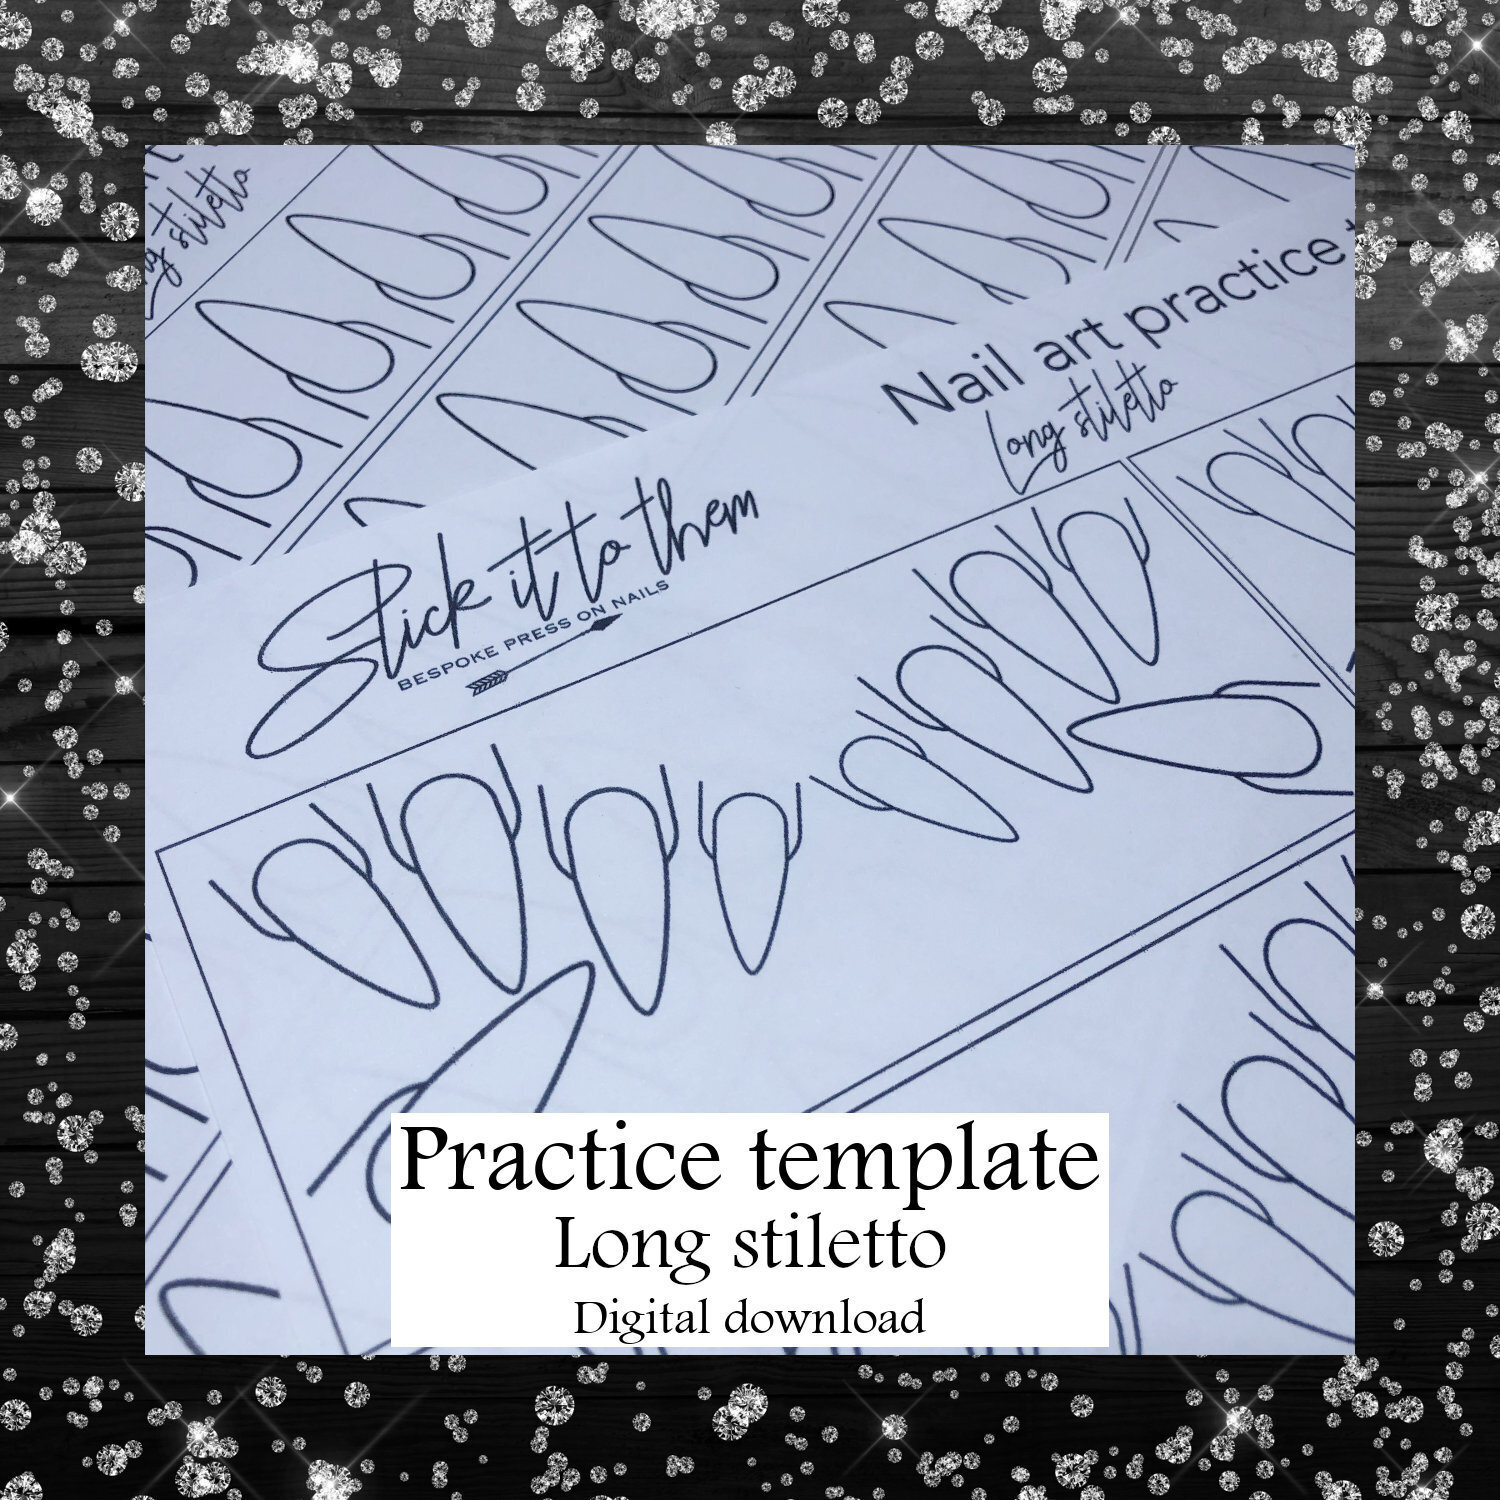 Practice template LONG STILETTO - DIGITAL DOWNLOAD - Print your own nail art practice sheets!